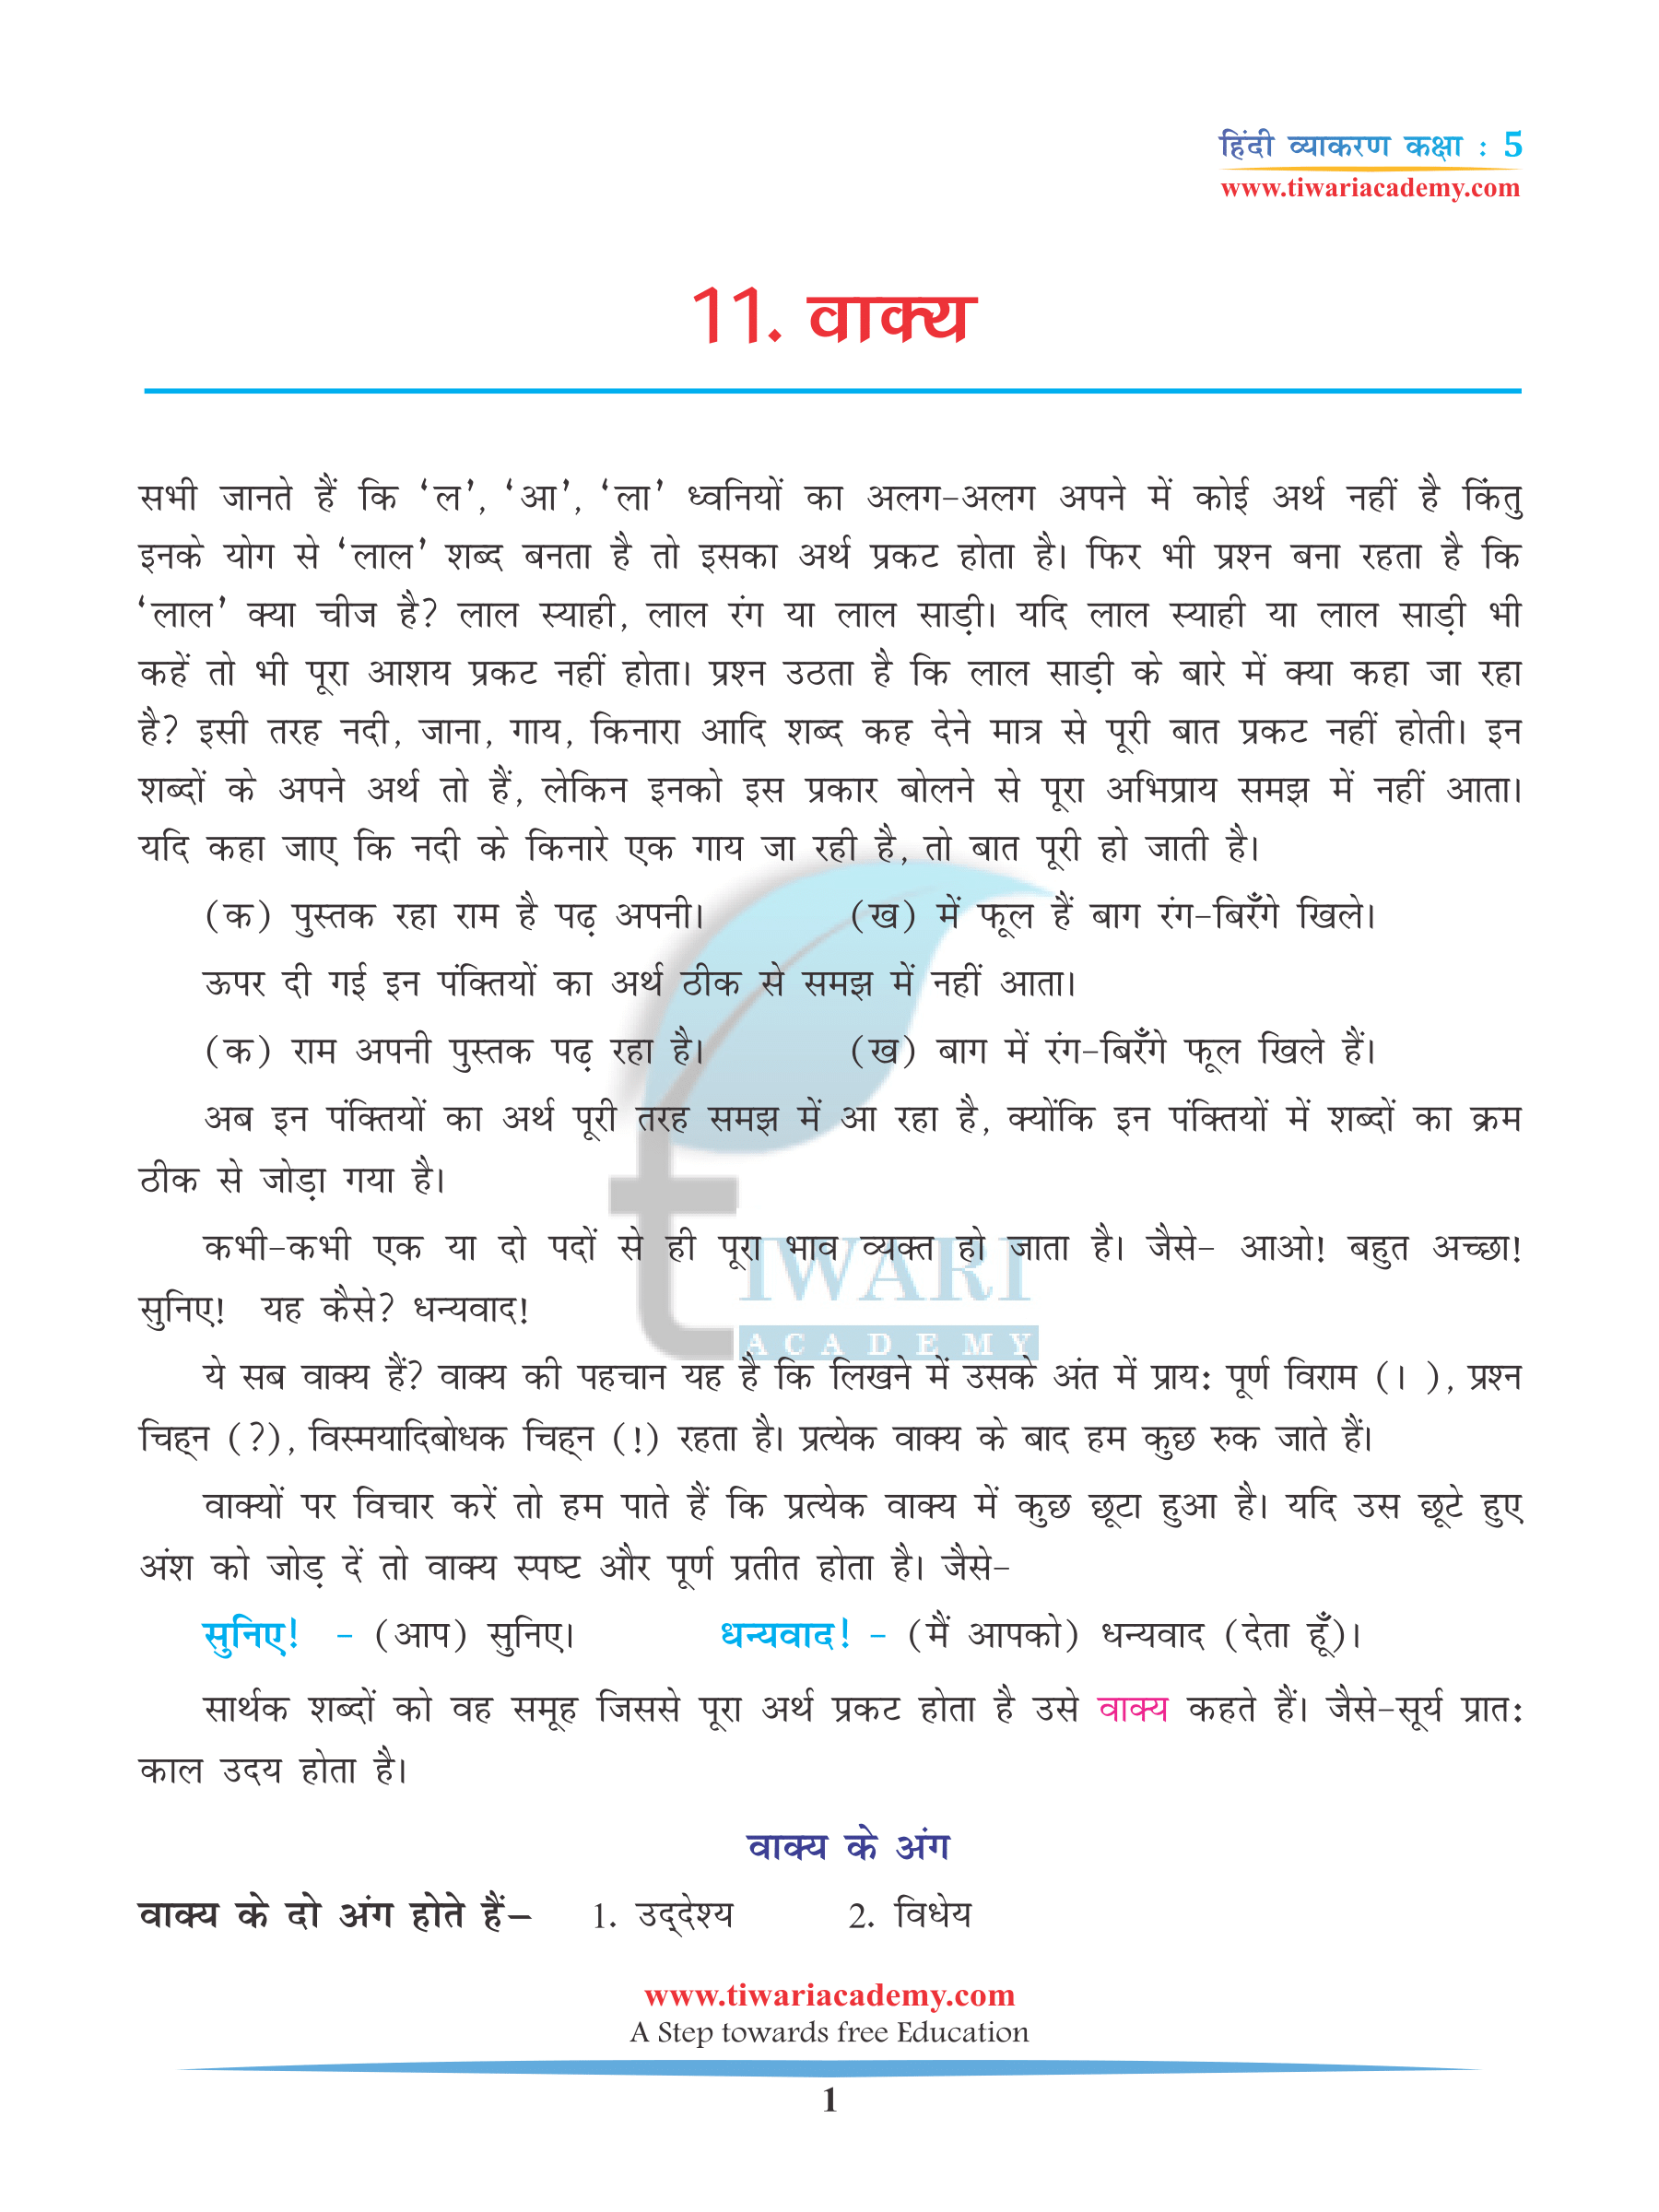 NCERT Solutions for Class 5 Hindi Grammar Chapter 11 Vaaky in PDF